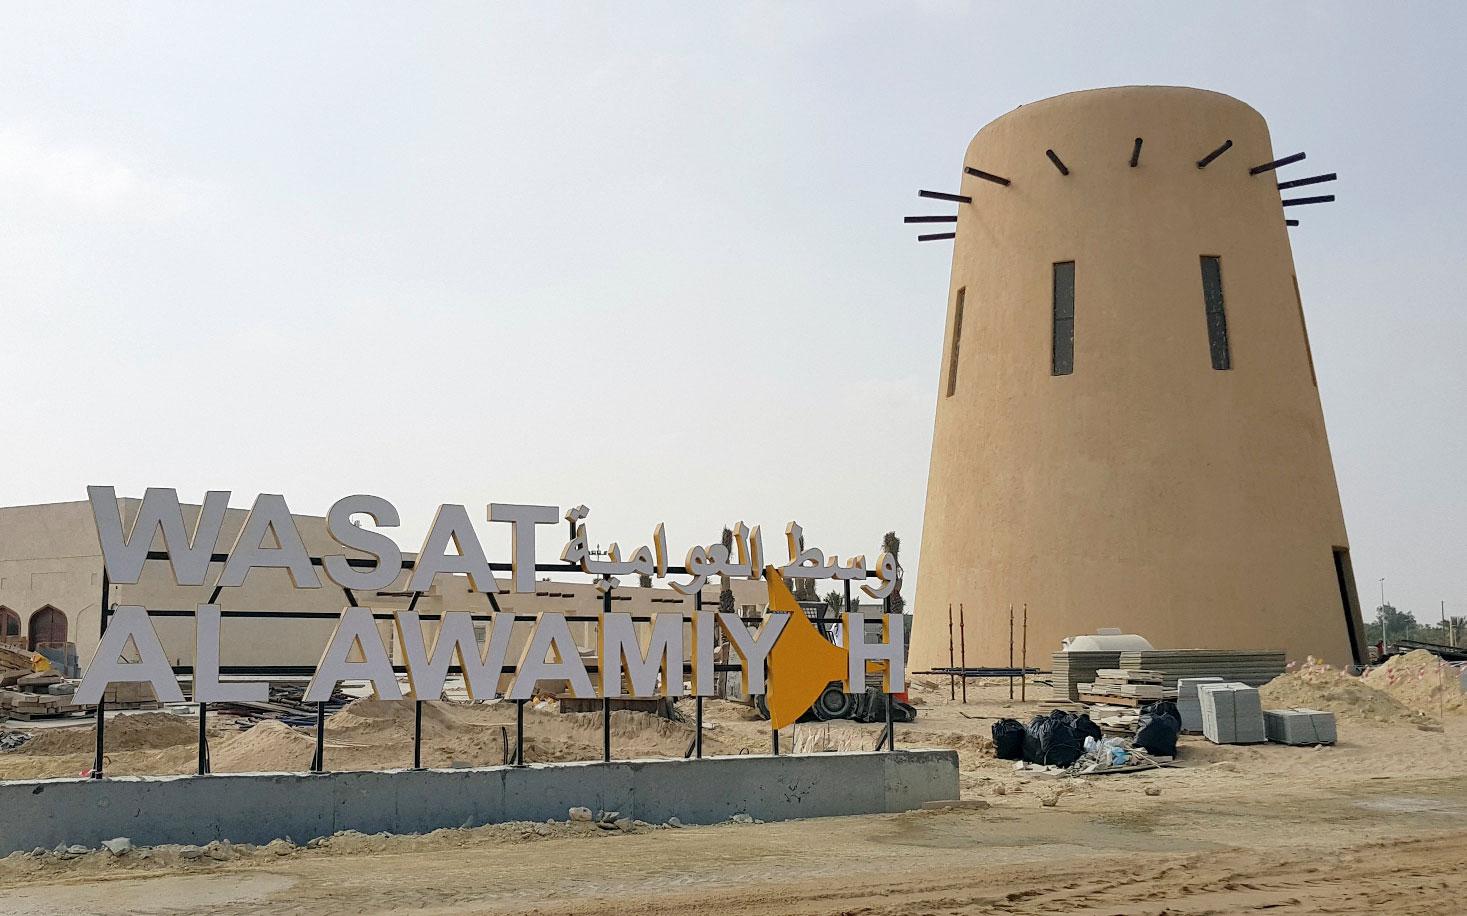 A sign is seen at a new Saudi state-run development project in the old quarter of Shi'ite town Awamiya, Saudi Arabia on January 8, 2019.